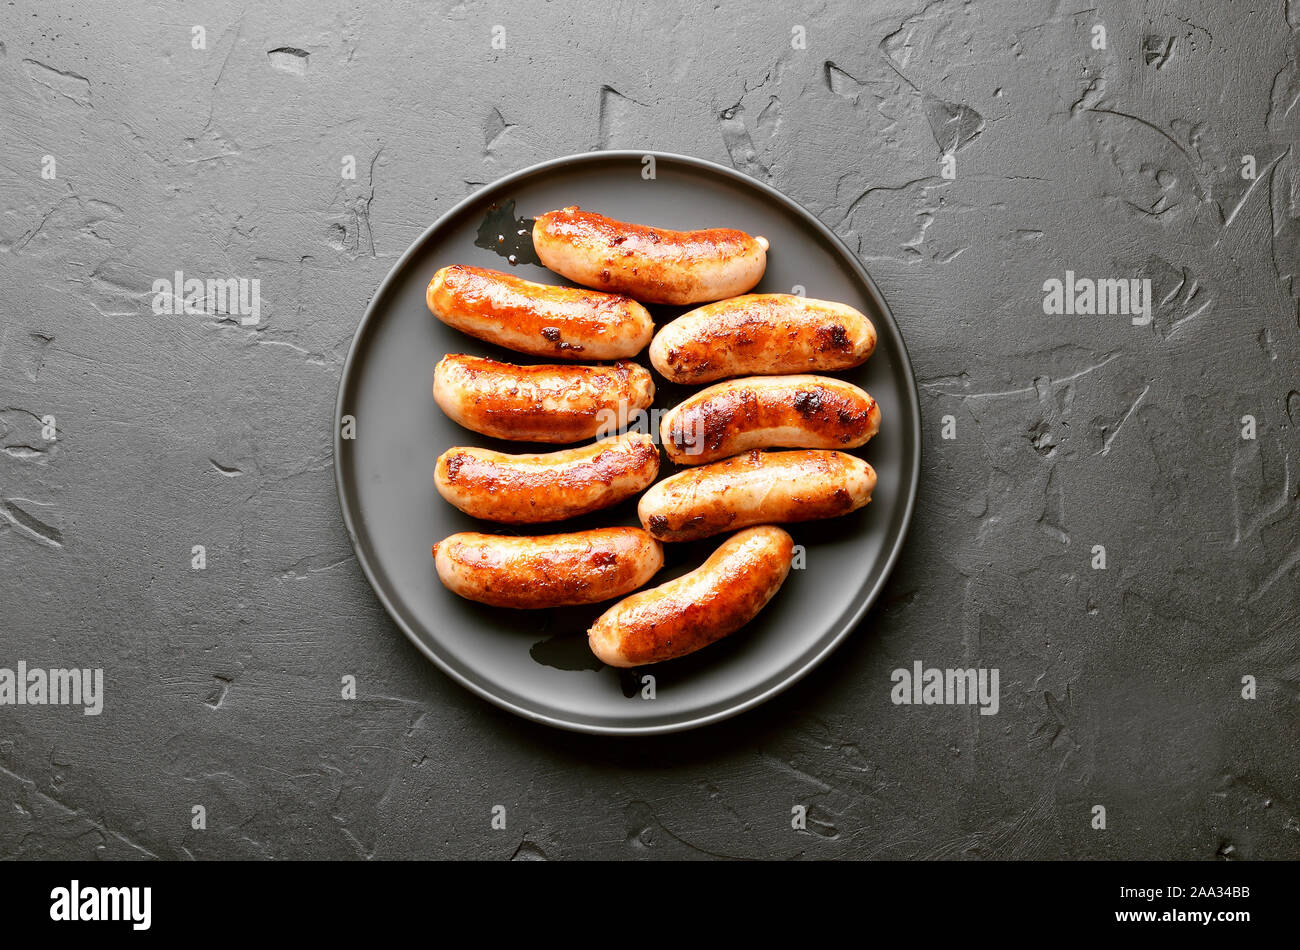 Fried sausage on over black stone background. Top view, flat lay Stock Photo